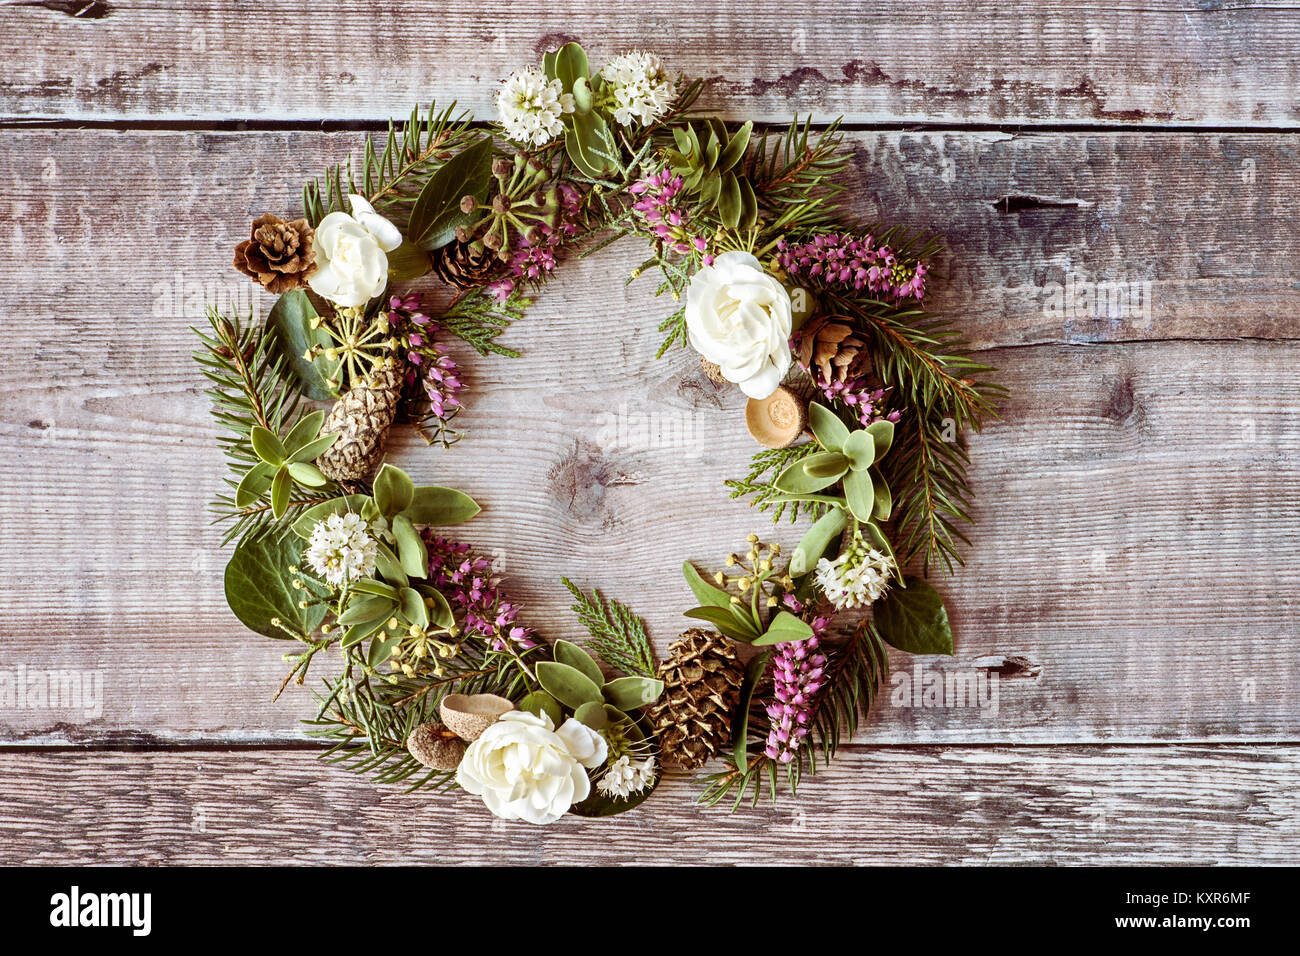 Close-up image of a Christmas festive door wreath Stock Photo